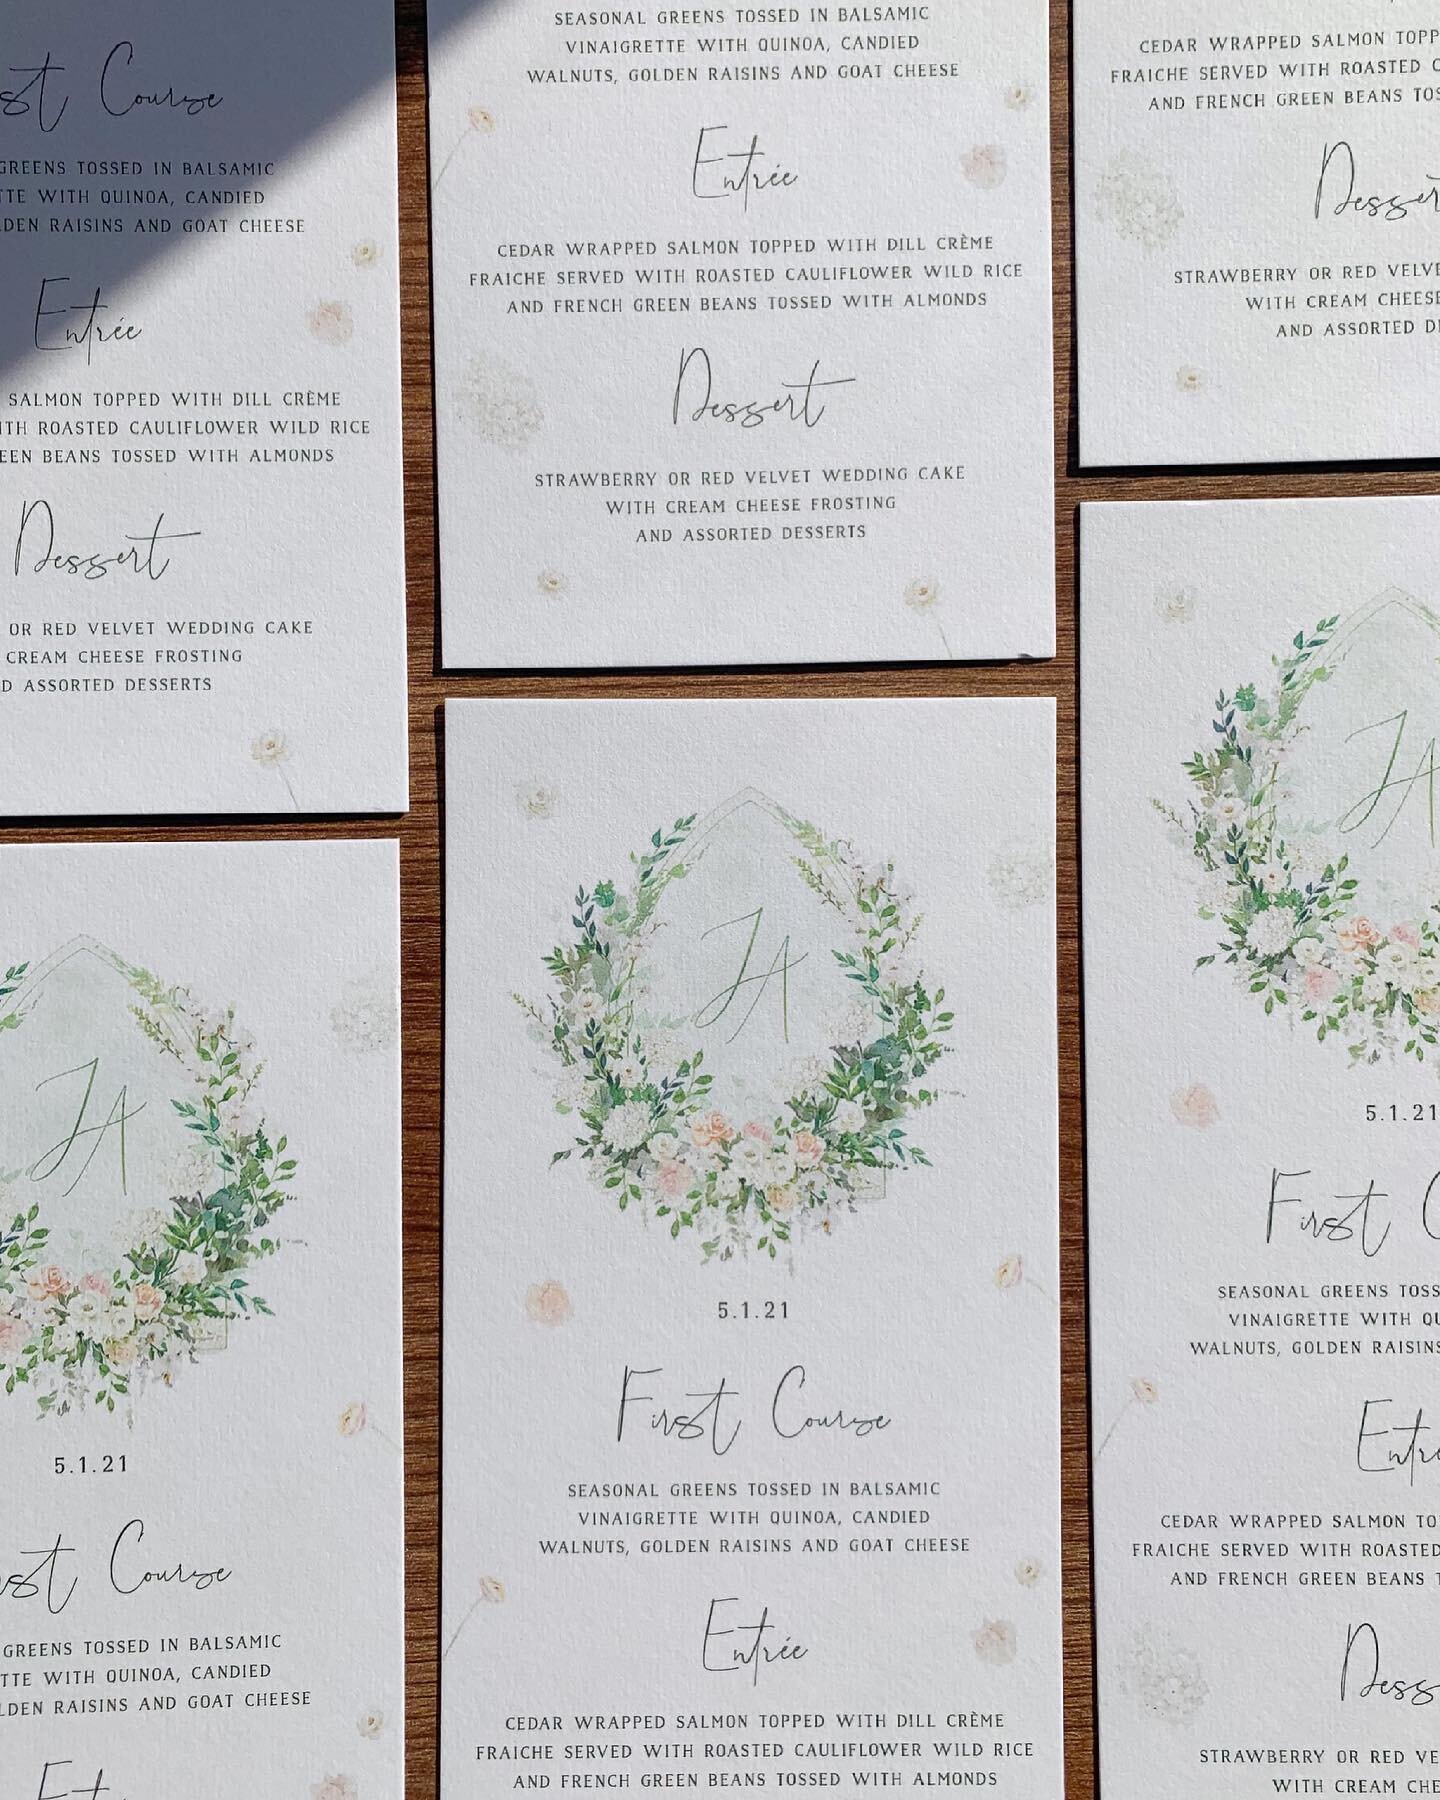 The OCD among us are going to panic at how imperfect these menus are lined up. I&rsquo;m sorry. Lean into the imperfection friends! Lean in!

I saw someone post a pic with #monogrammonday today so I thought I&rsquo;d contribute. Here&rsquo;s a custom menu design featuring a custom watercolor wedding crest/monogram/whatever you want to call it. This wedding was one of my favorite projects ever. 

Visit www.Jayebird.com for more details on how we can work together on your custom invites! 

#stationery #weddinginvitations #customweddinginvitations #weddingmenu #weddingmonogram #weddingcrest #weddingpapergoods